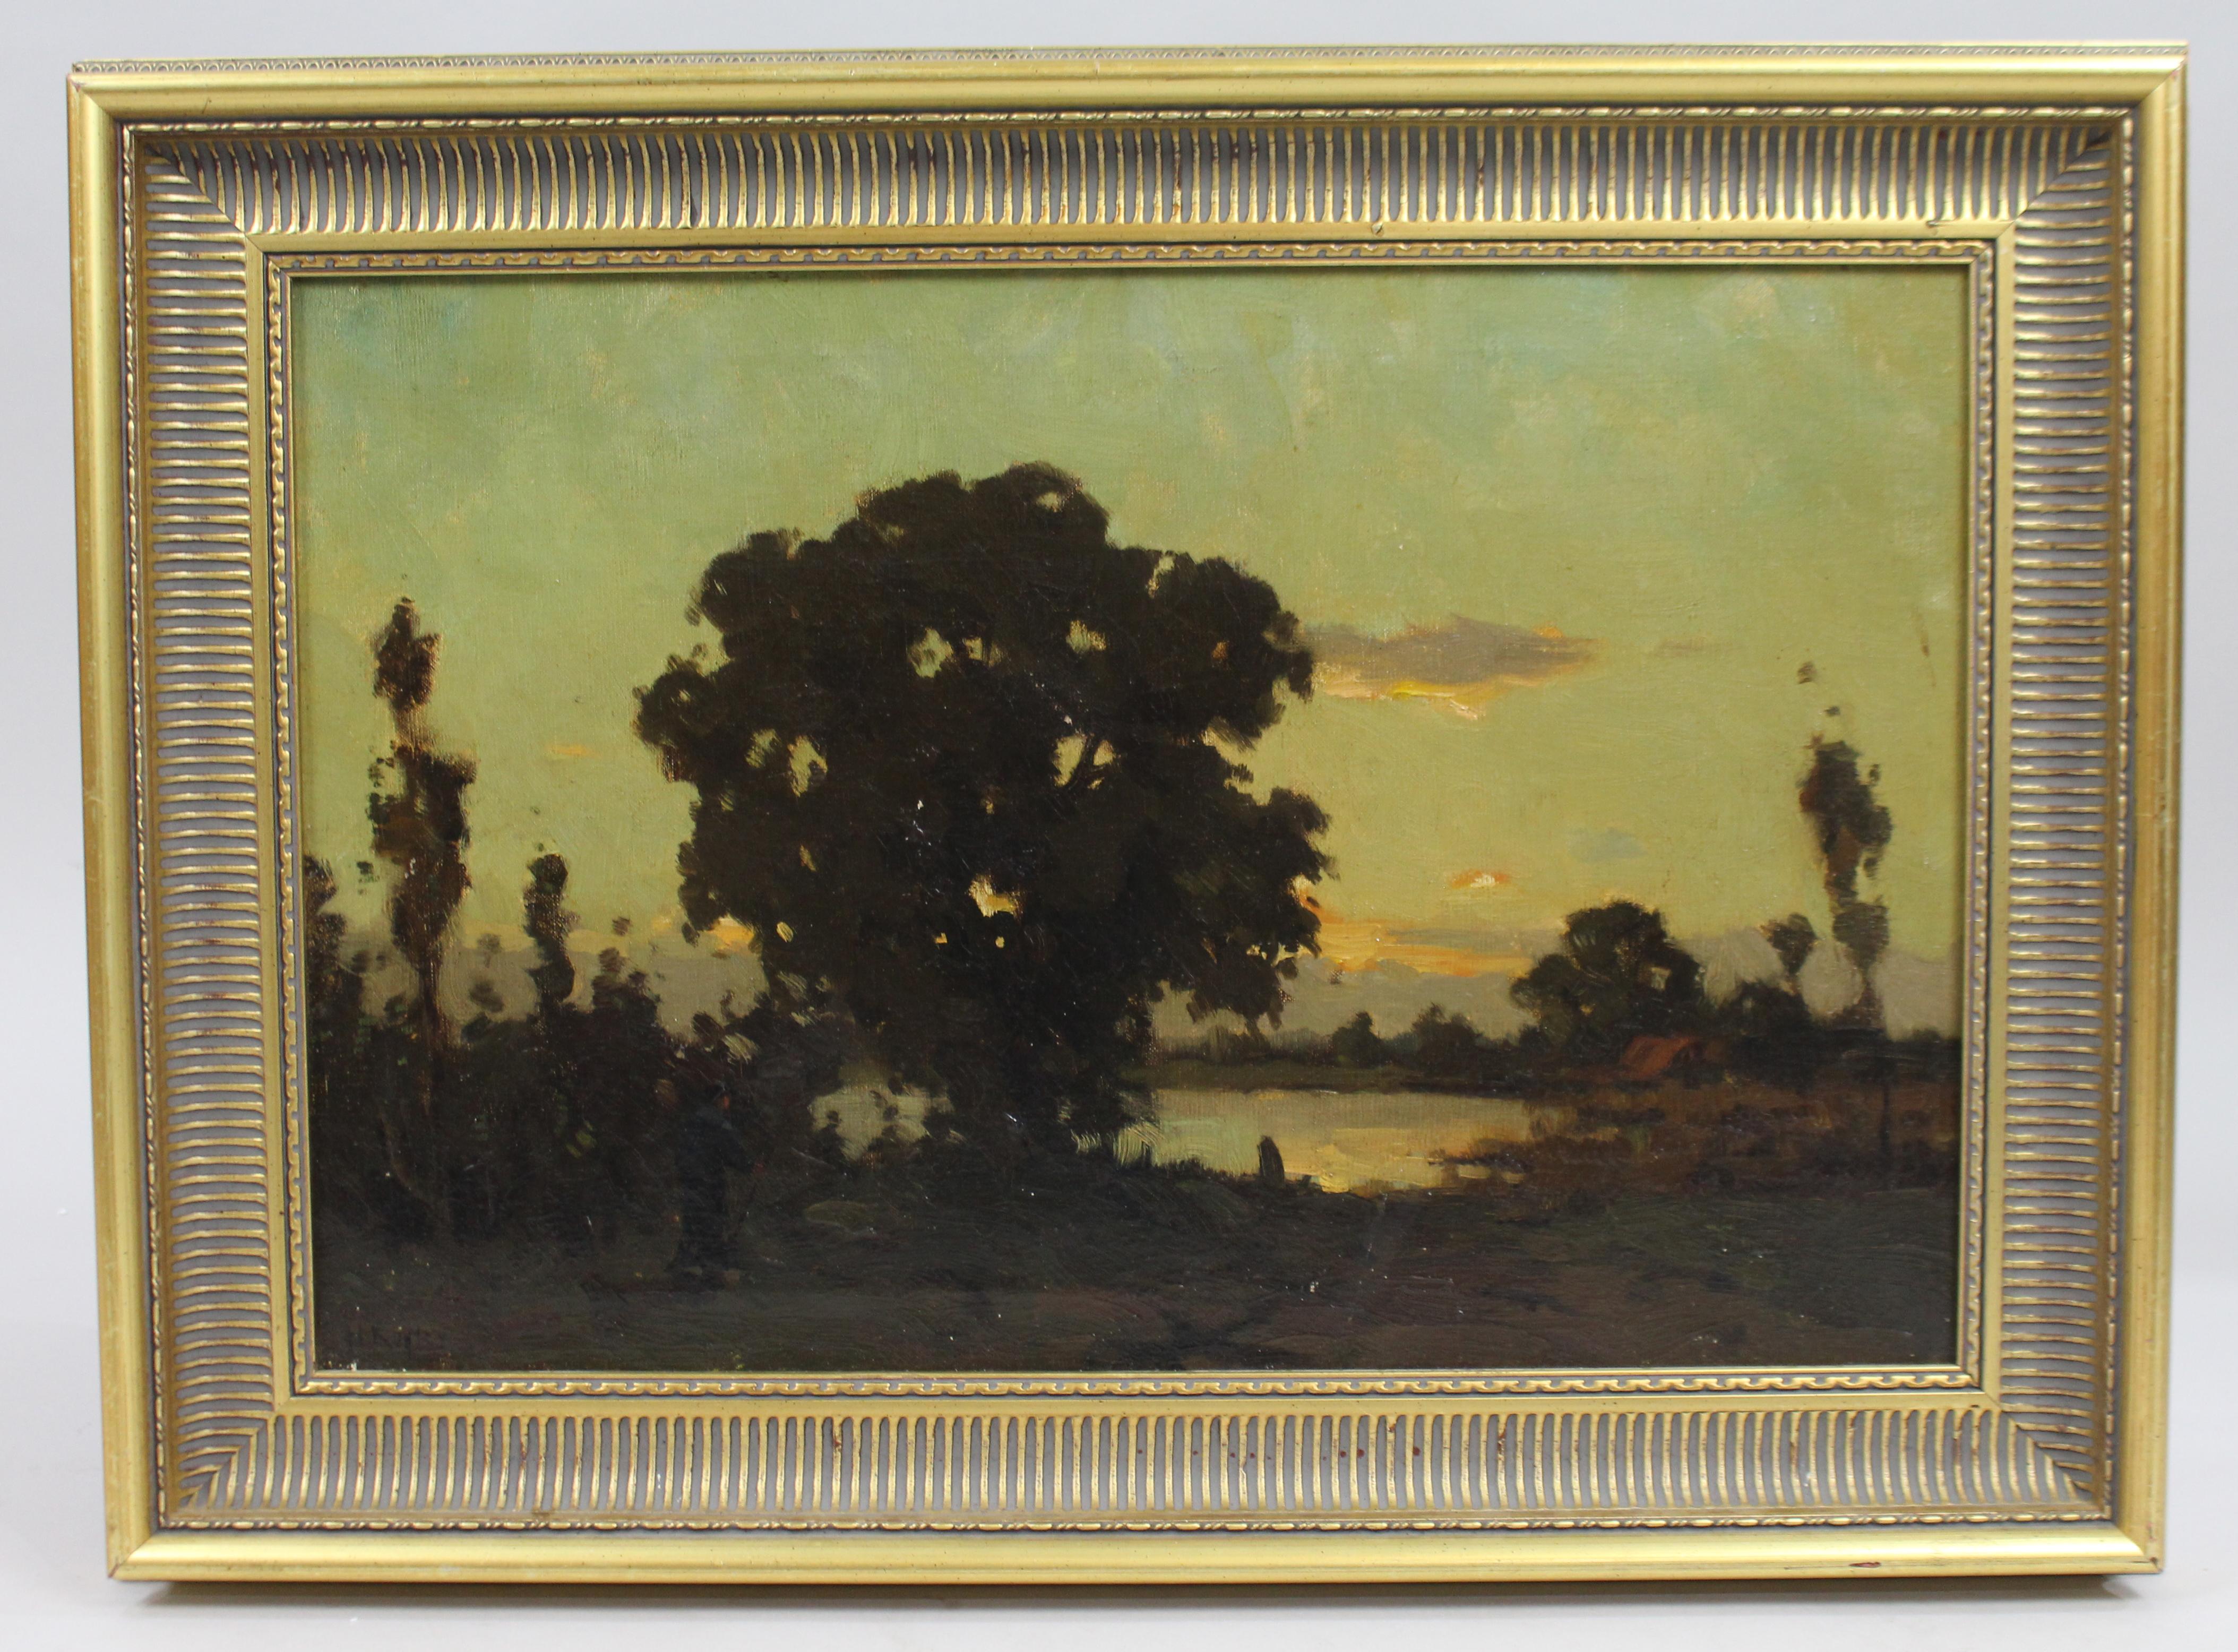 19th c. landscape by Hans Kugler (1840-73) Oil on Canvas


Late 19th century landscape at dusk

Signed by the artist to the lower left

Lots of atmosphere and subtlety to the rapidly produced work.

The canvas in good condition with some